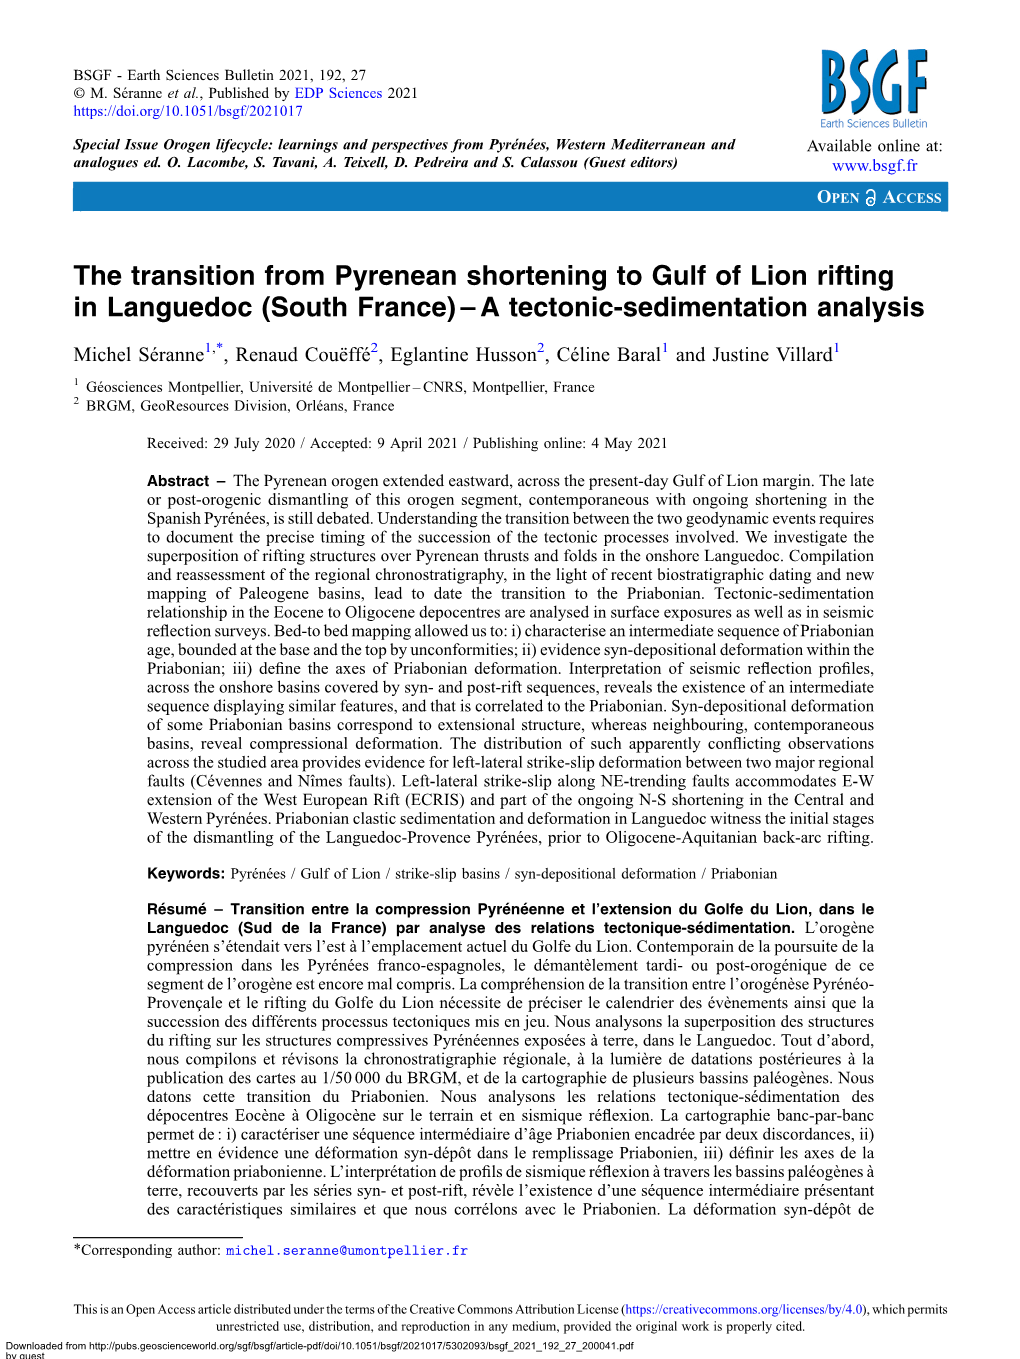 The Transition from Pyrenean Shortening to Gulf of Lion Rifting in Languedoc (South France) – a Tectonic-Sedimentation Analysis